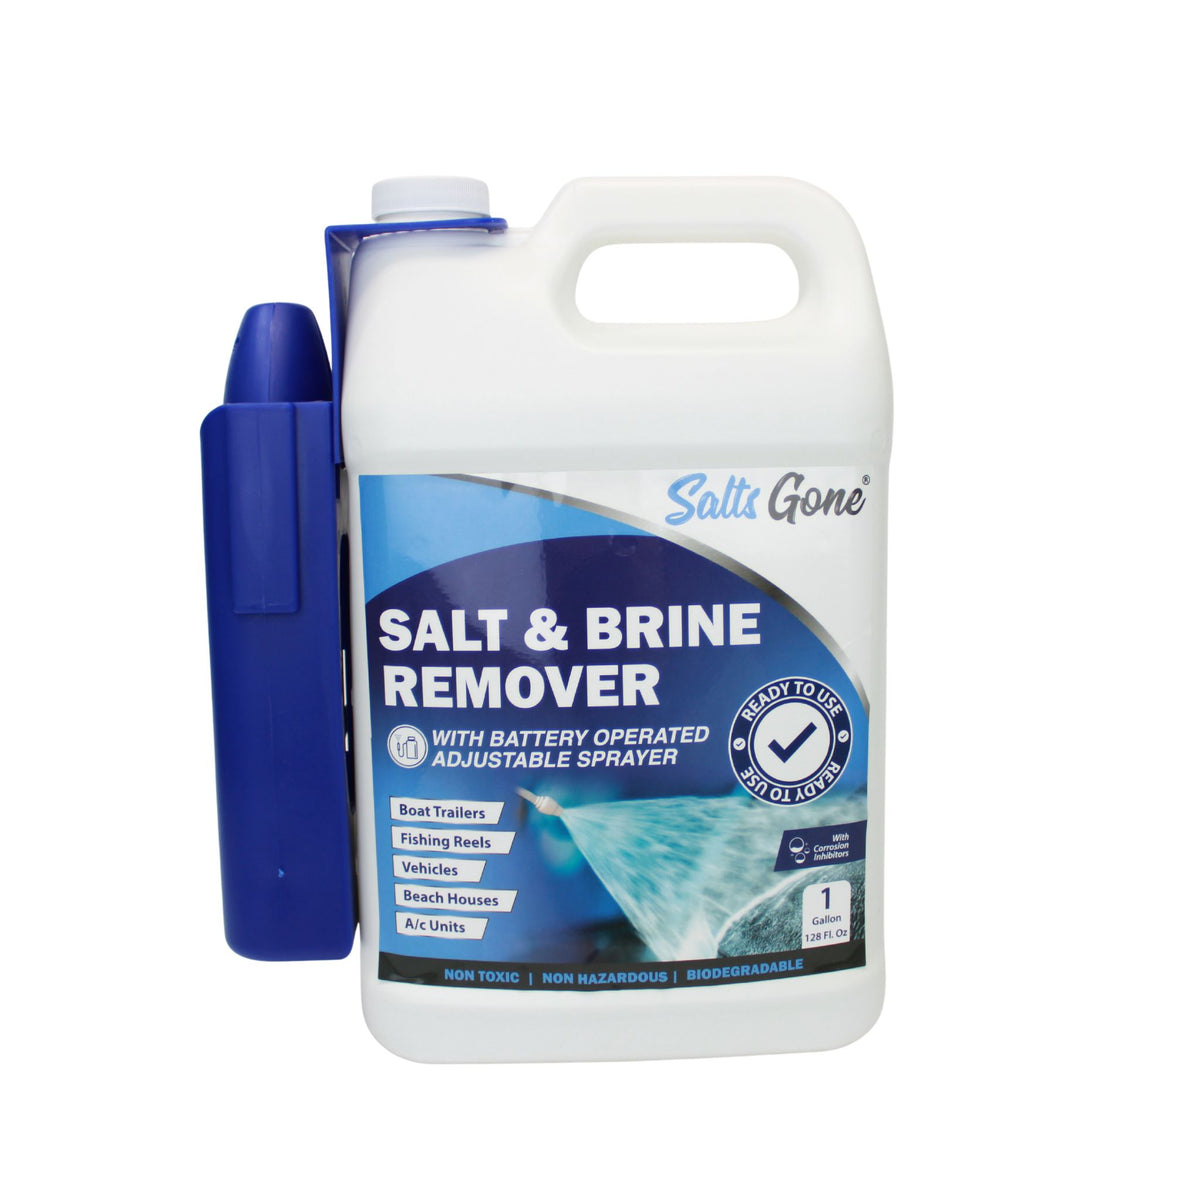 Use Salts Gone all over your boat/vehicle fabrics. Yes it does it job